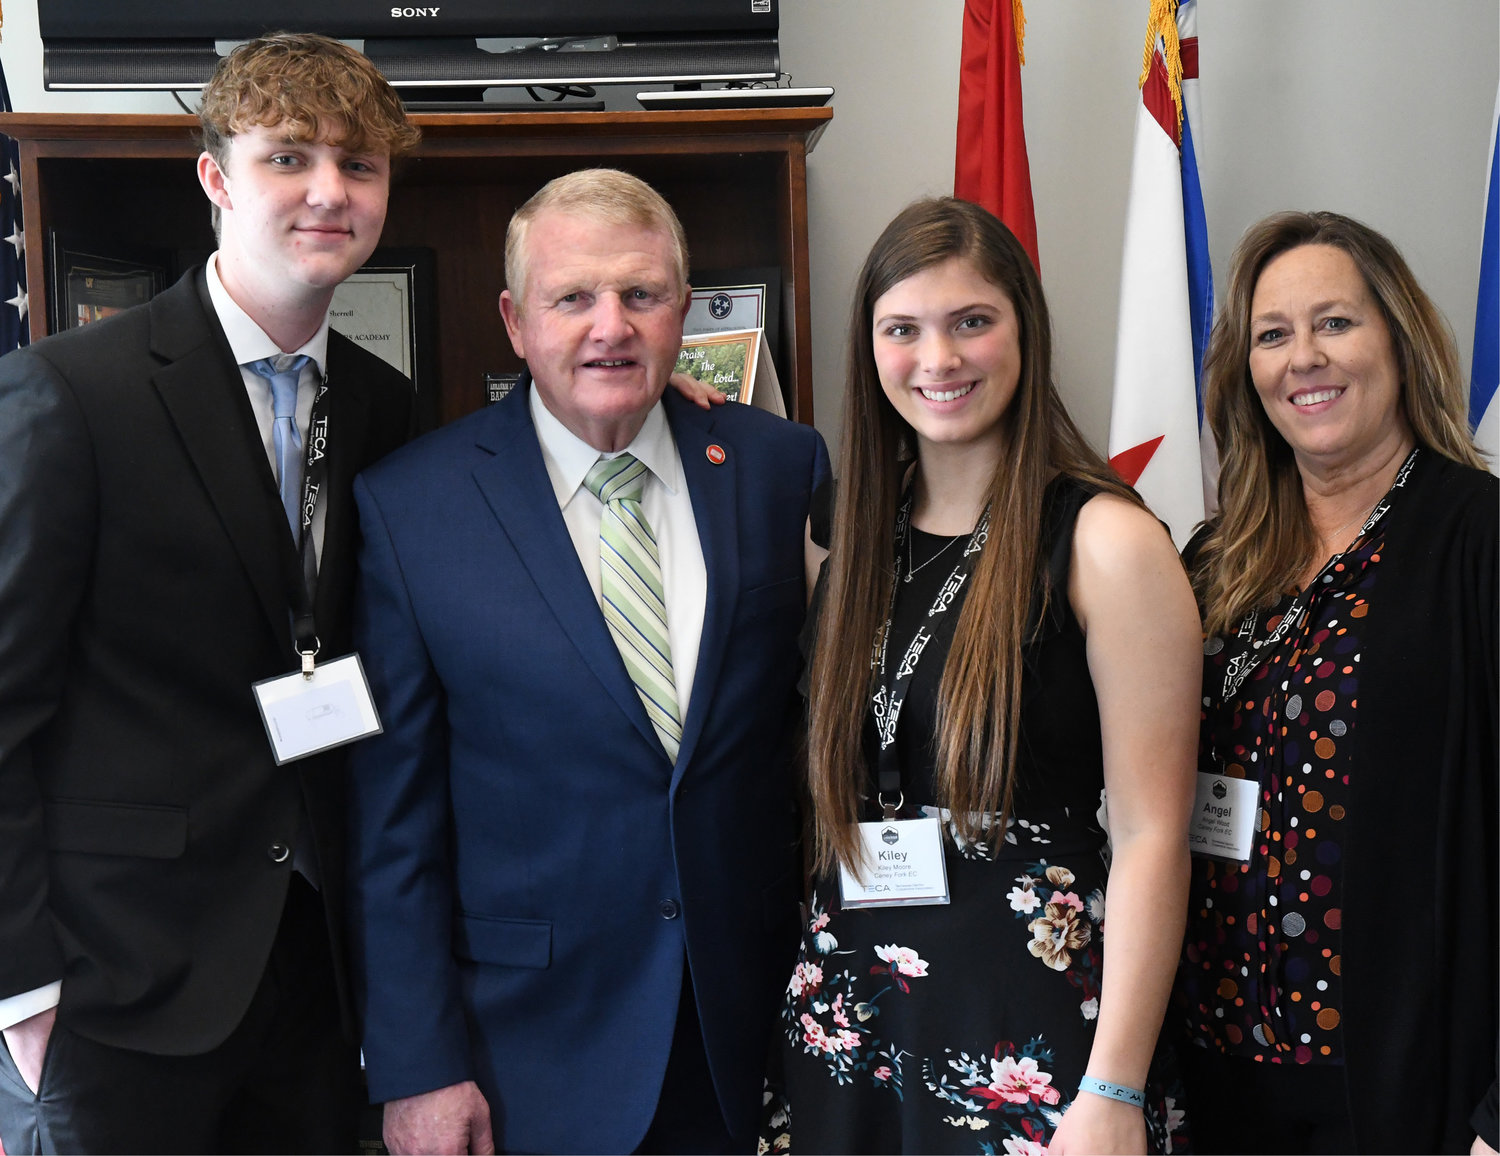 L-R: Josiah Rushing, State Representative Paul Sherrell, Kiley Moore, and Angel Wood, communications coordinator for Caney Fork Electric Cooperative